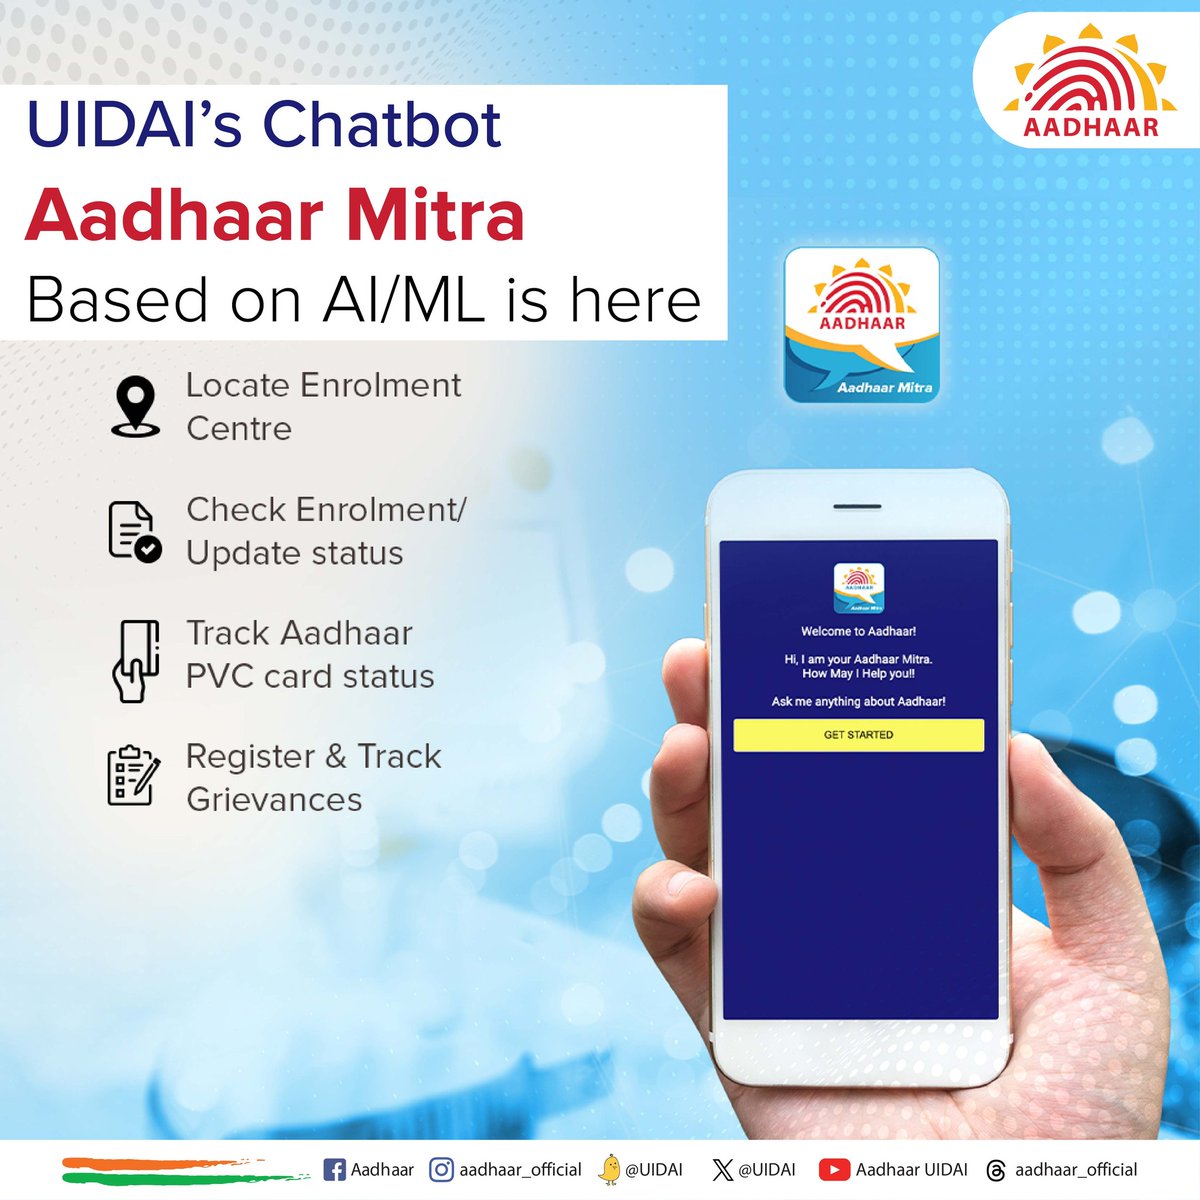 #UIDAI’s AI/ML-based chat support is available for better resident interaction! Now Residents can track #Aadhaar PVC card status, register & track grievances, etc. To interact with #AadhaarMitra, visit- uidai.gov.in